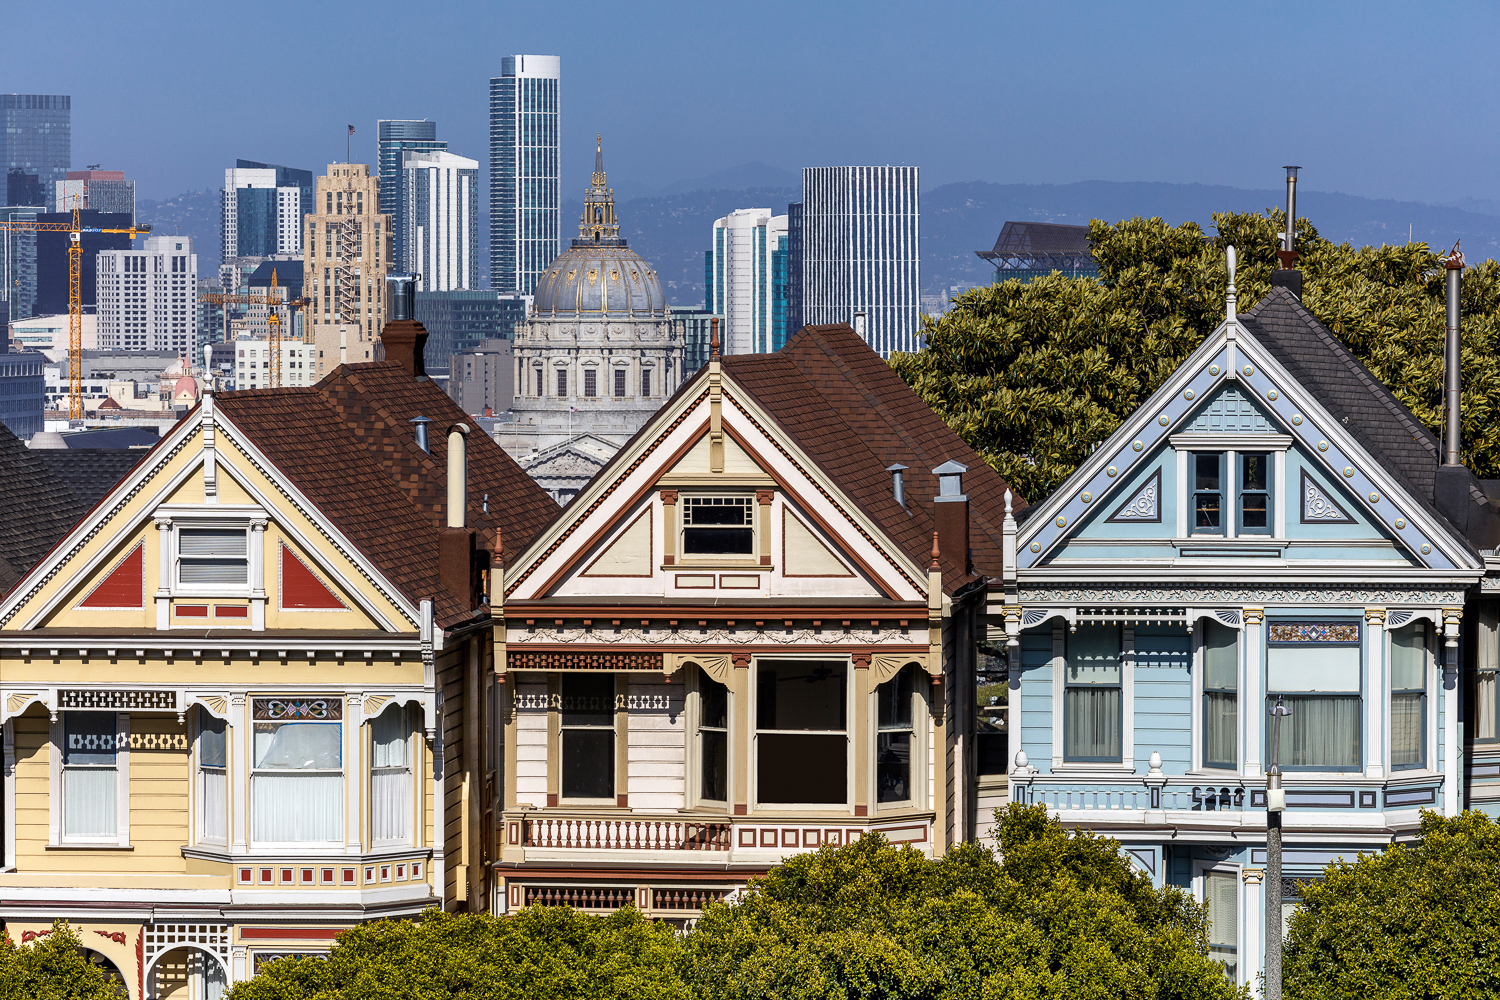 714 Steiner Street with San Francisco in the background, photo by Rob Jordan